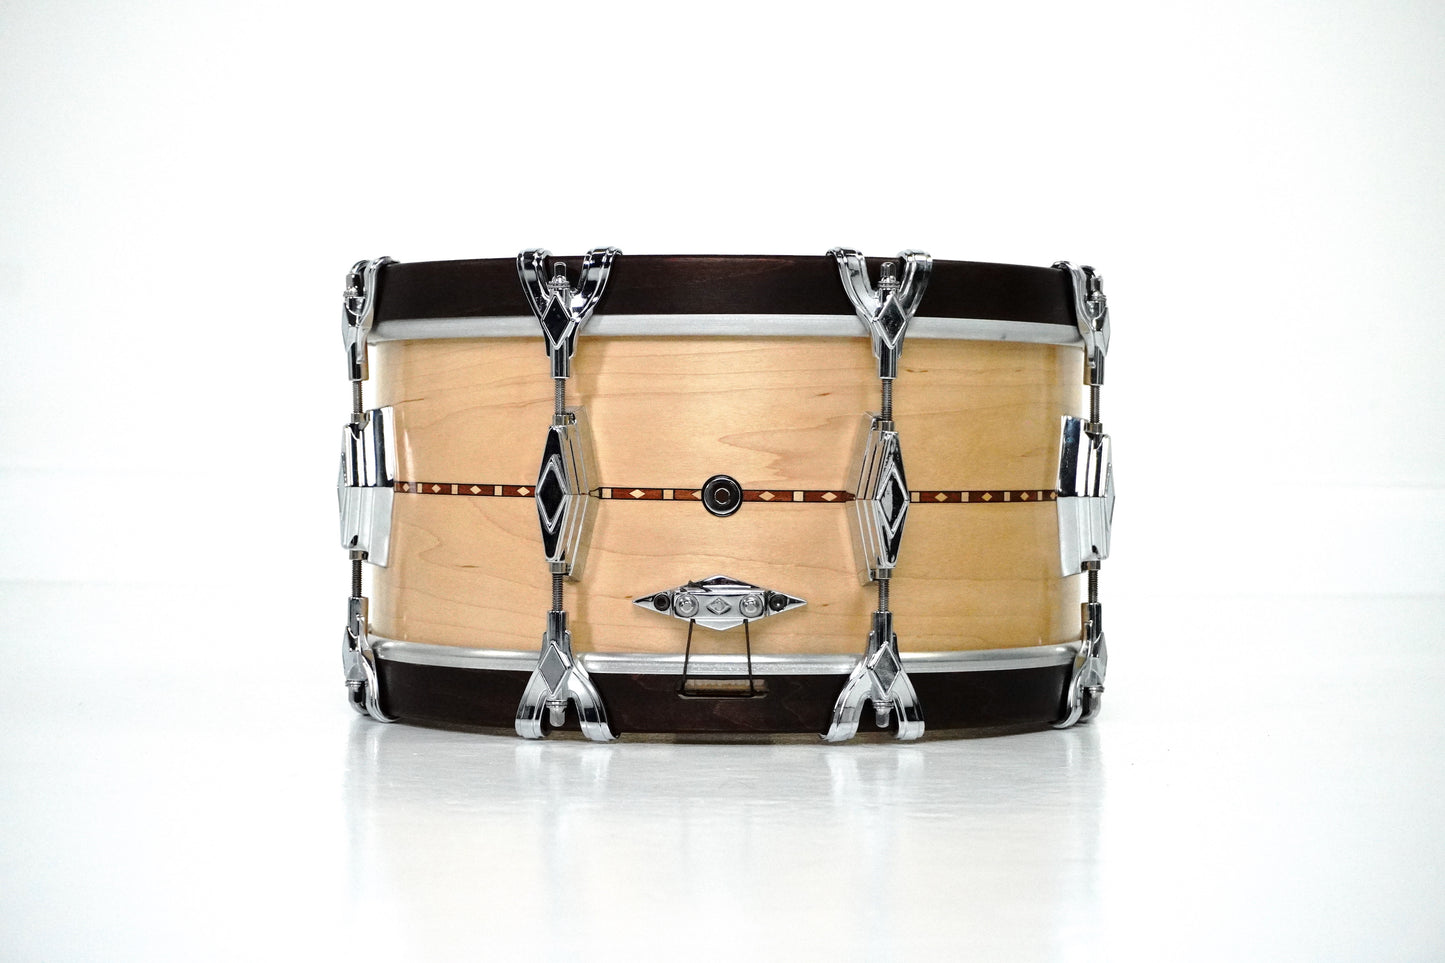 Craviotto 14” x 7” Super Swing Solid Maple Snare Drum with Wooden Hoops